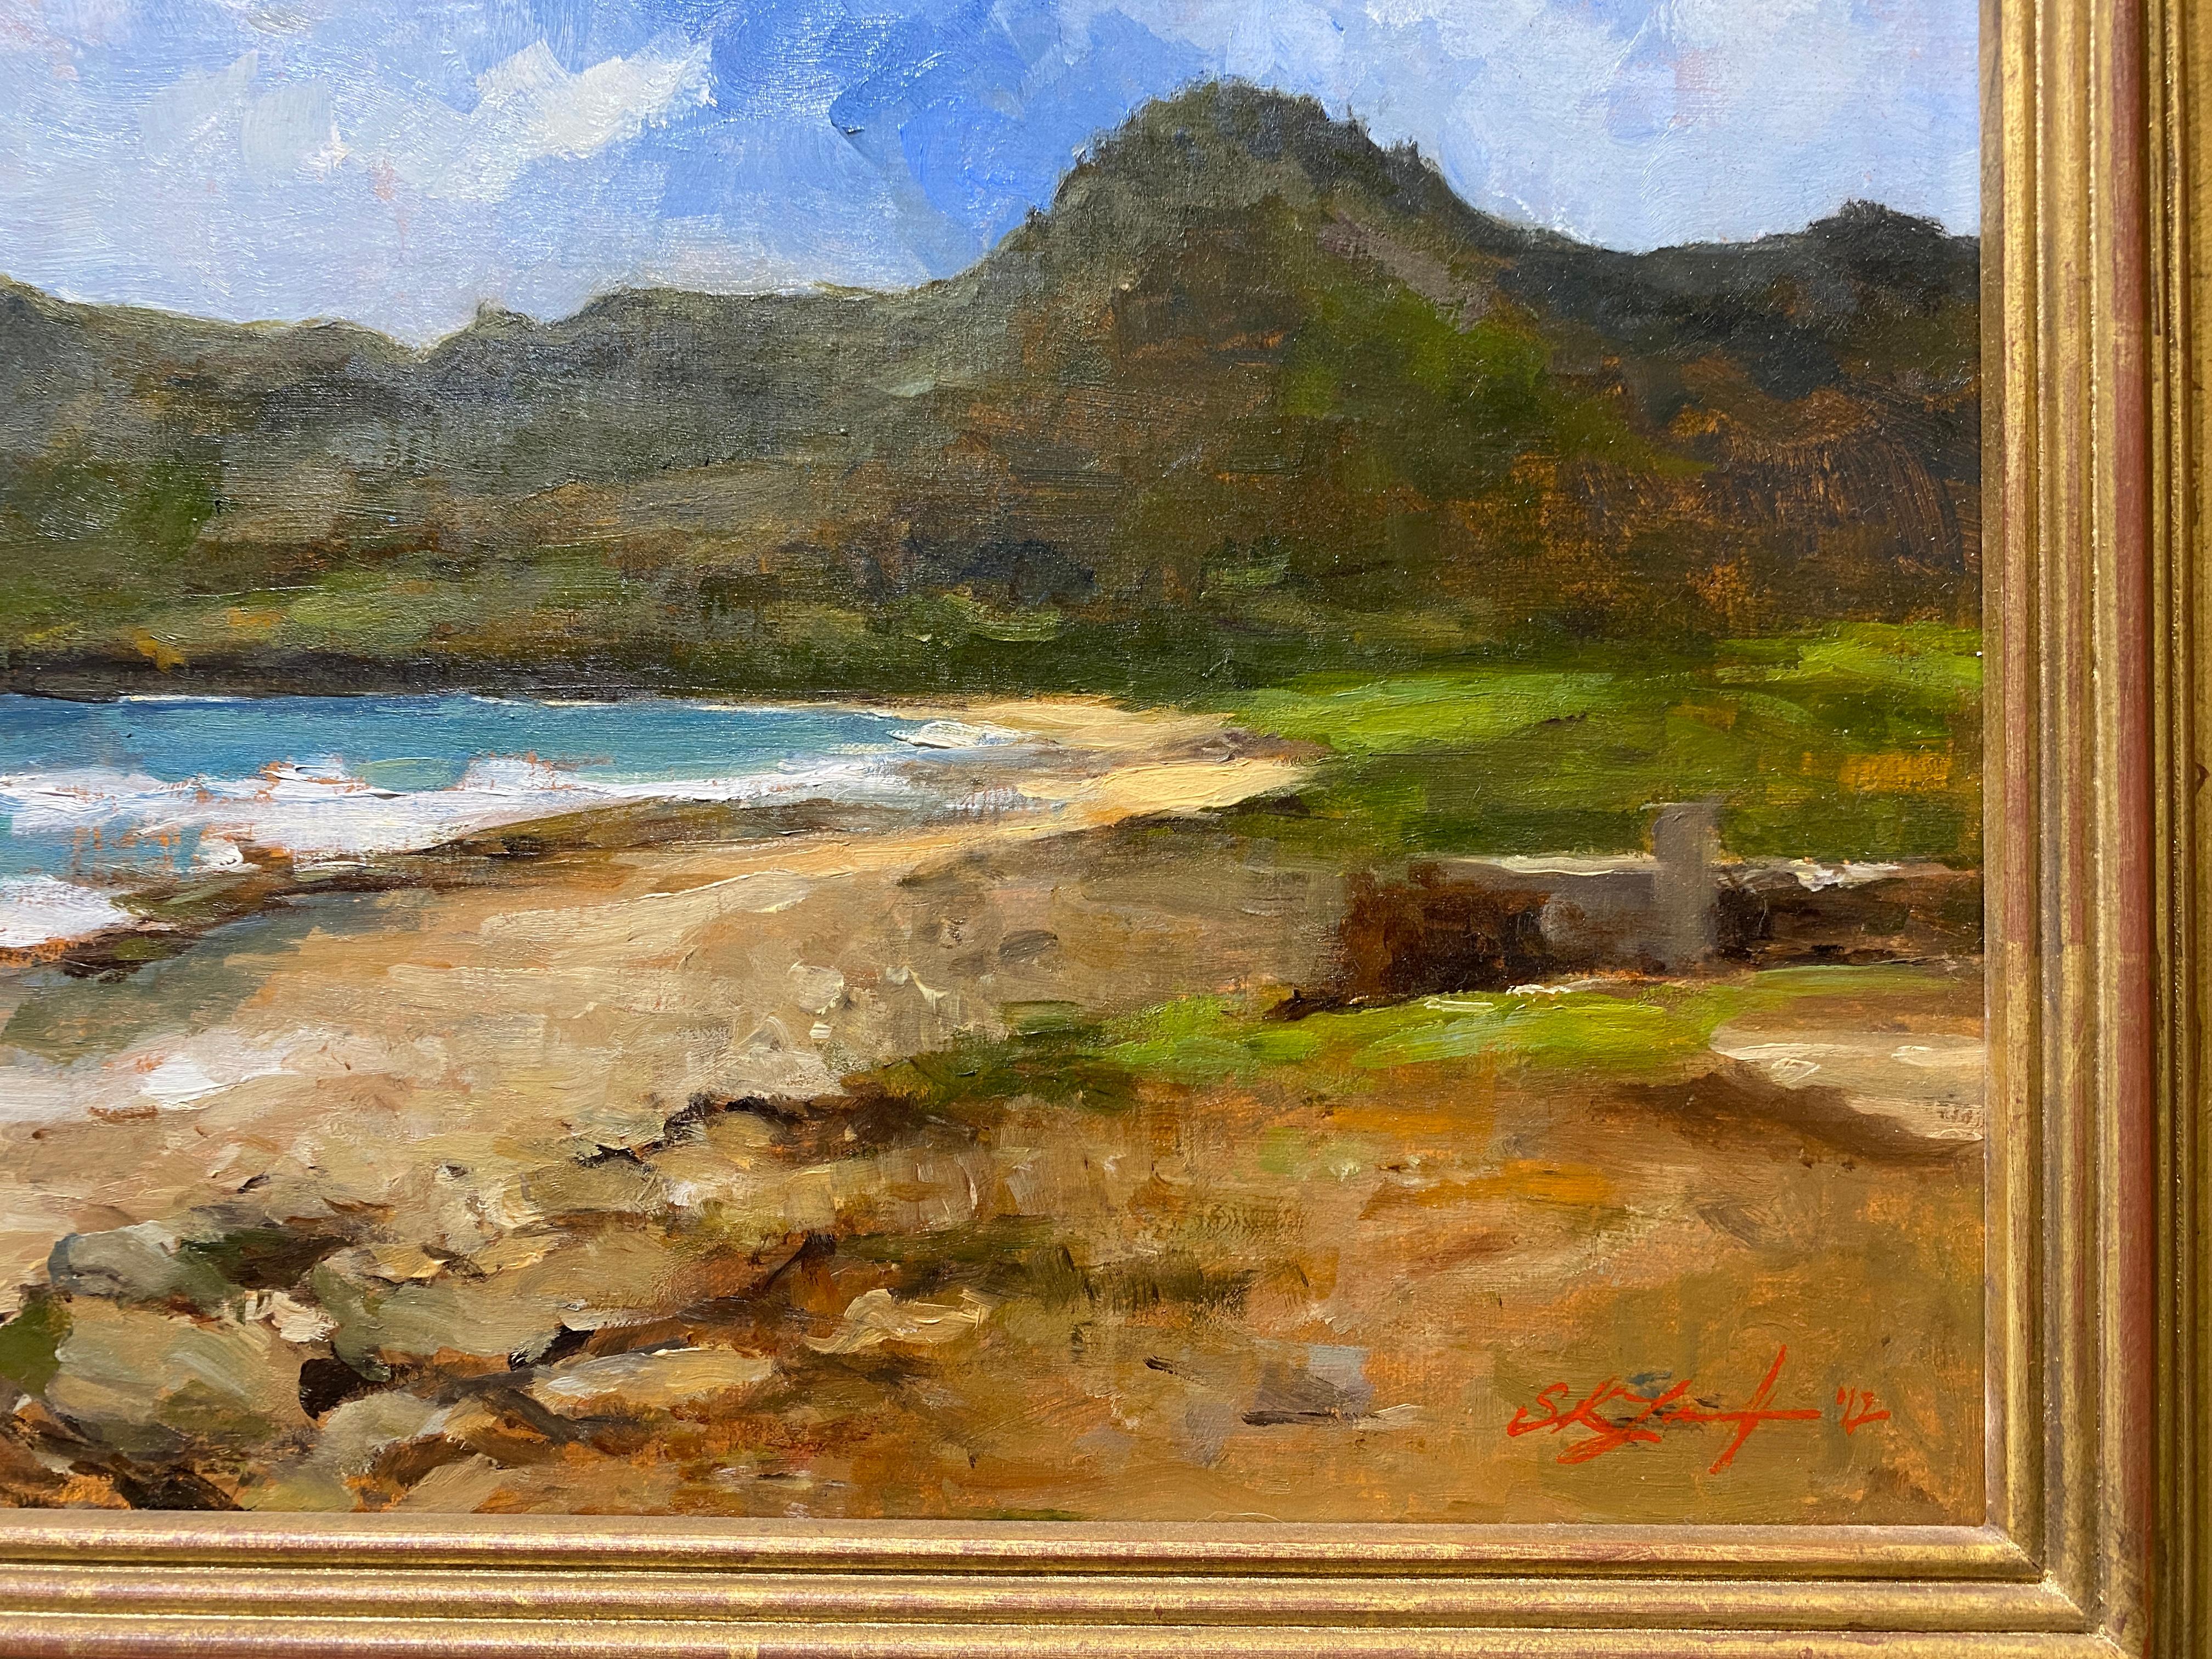 An oil painting of a St. Barths landscape by Contemporary Realist painter, Sarah Lamb. Anse de Grand Fond is a beach in Sant Barthelemy, covered with stunning shells and coral. A quiet coastline of rocks and natural caribbean treasures. 

Artist